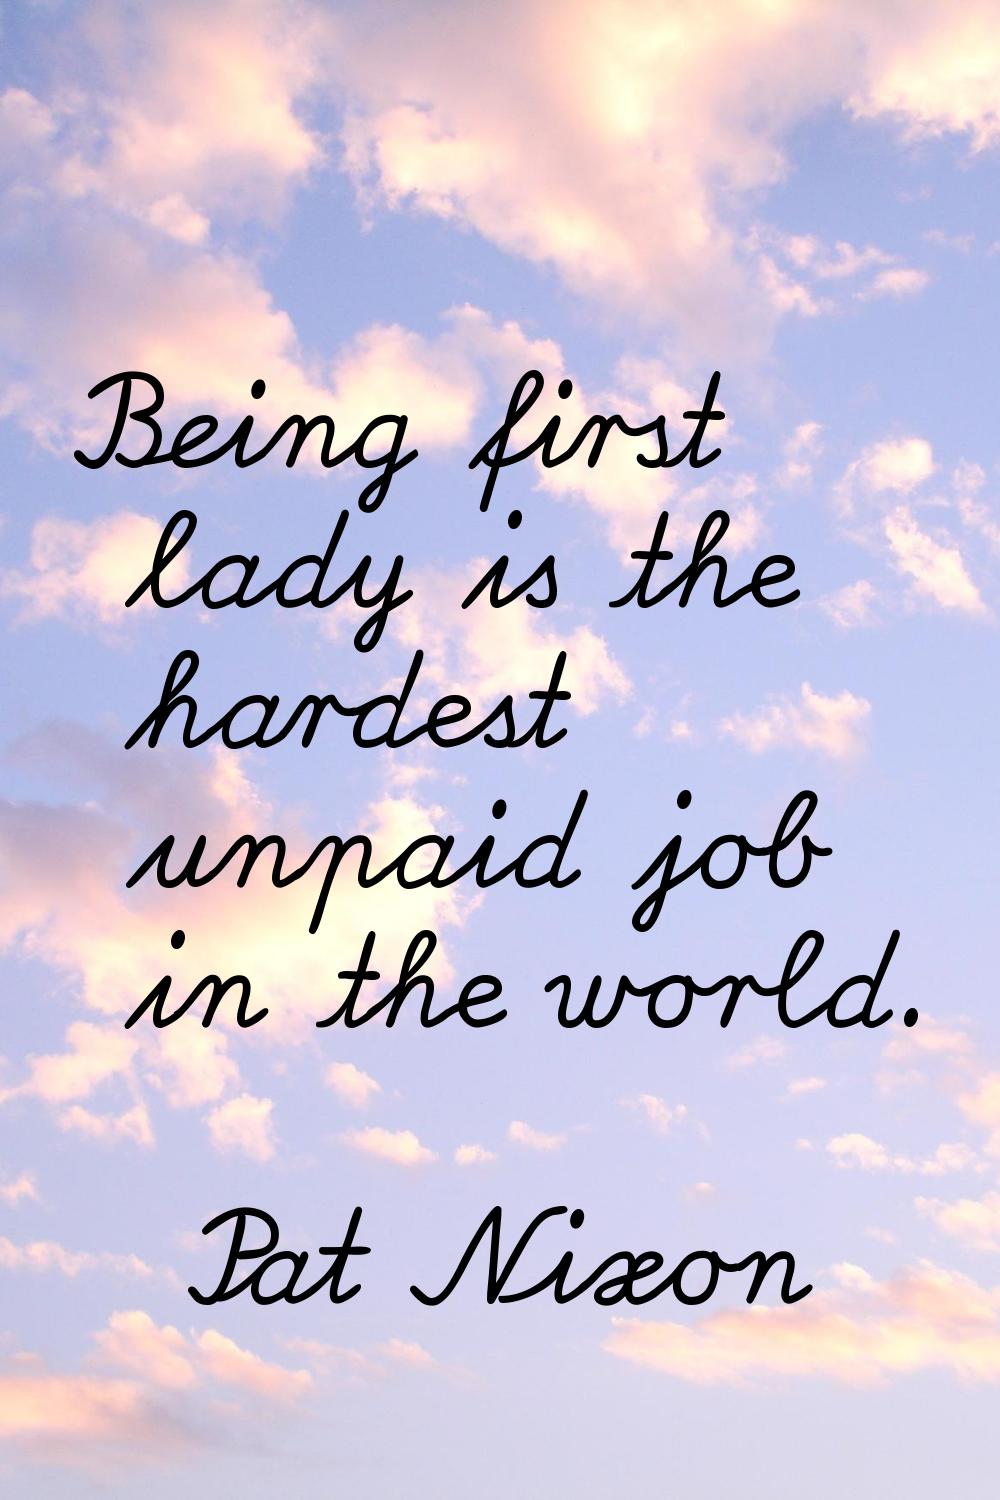 Being first lady is the hardest unpaid job in the world.